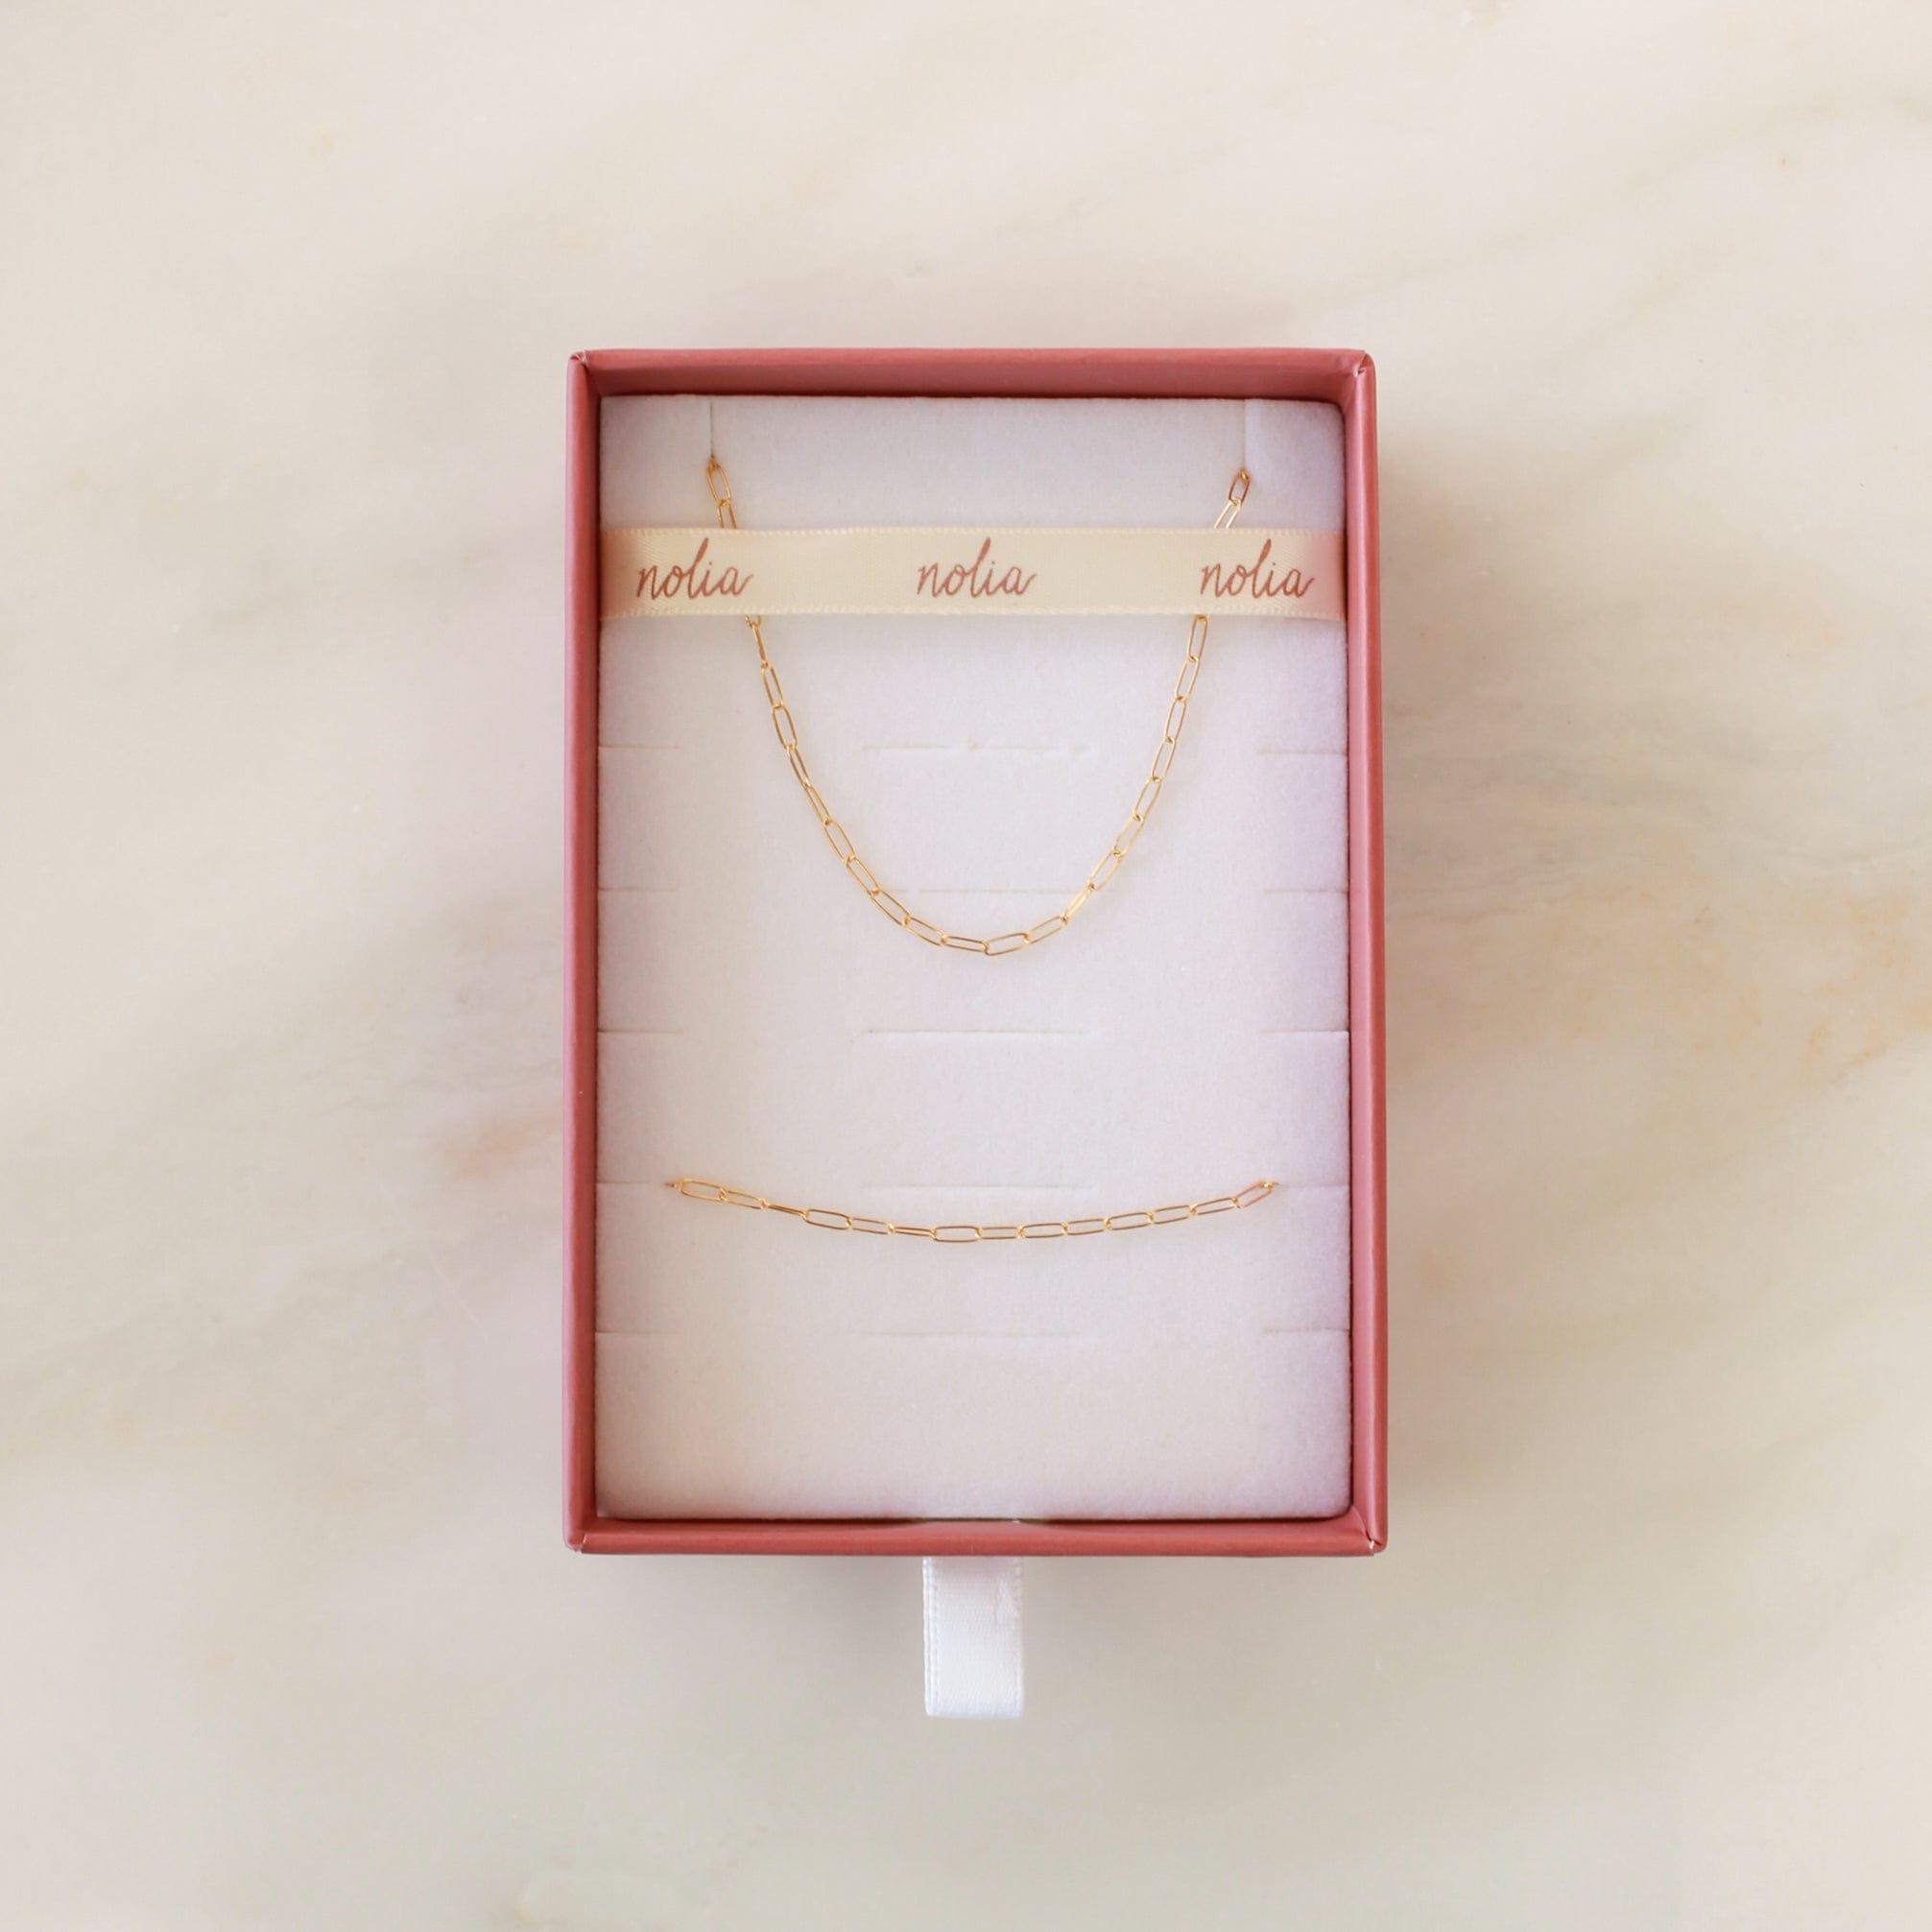 Modern Chain Gift Set - Nolia Jewelry - Meaningful + Sustainably Handcrafted Jewelry